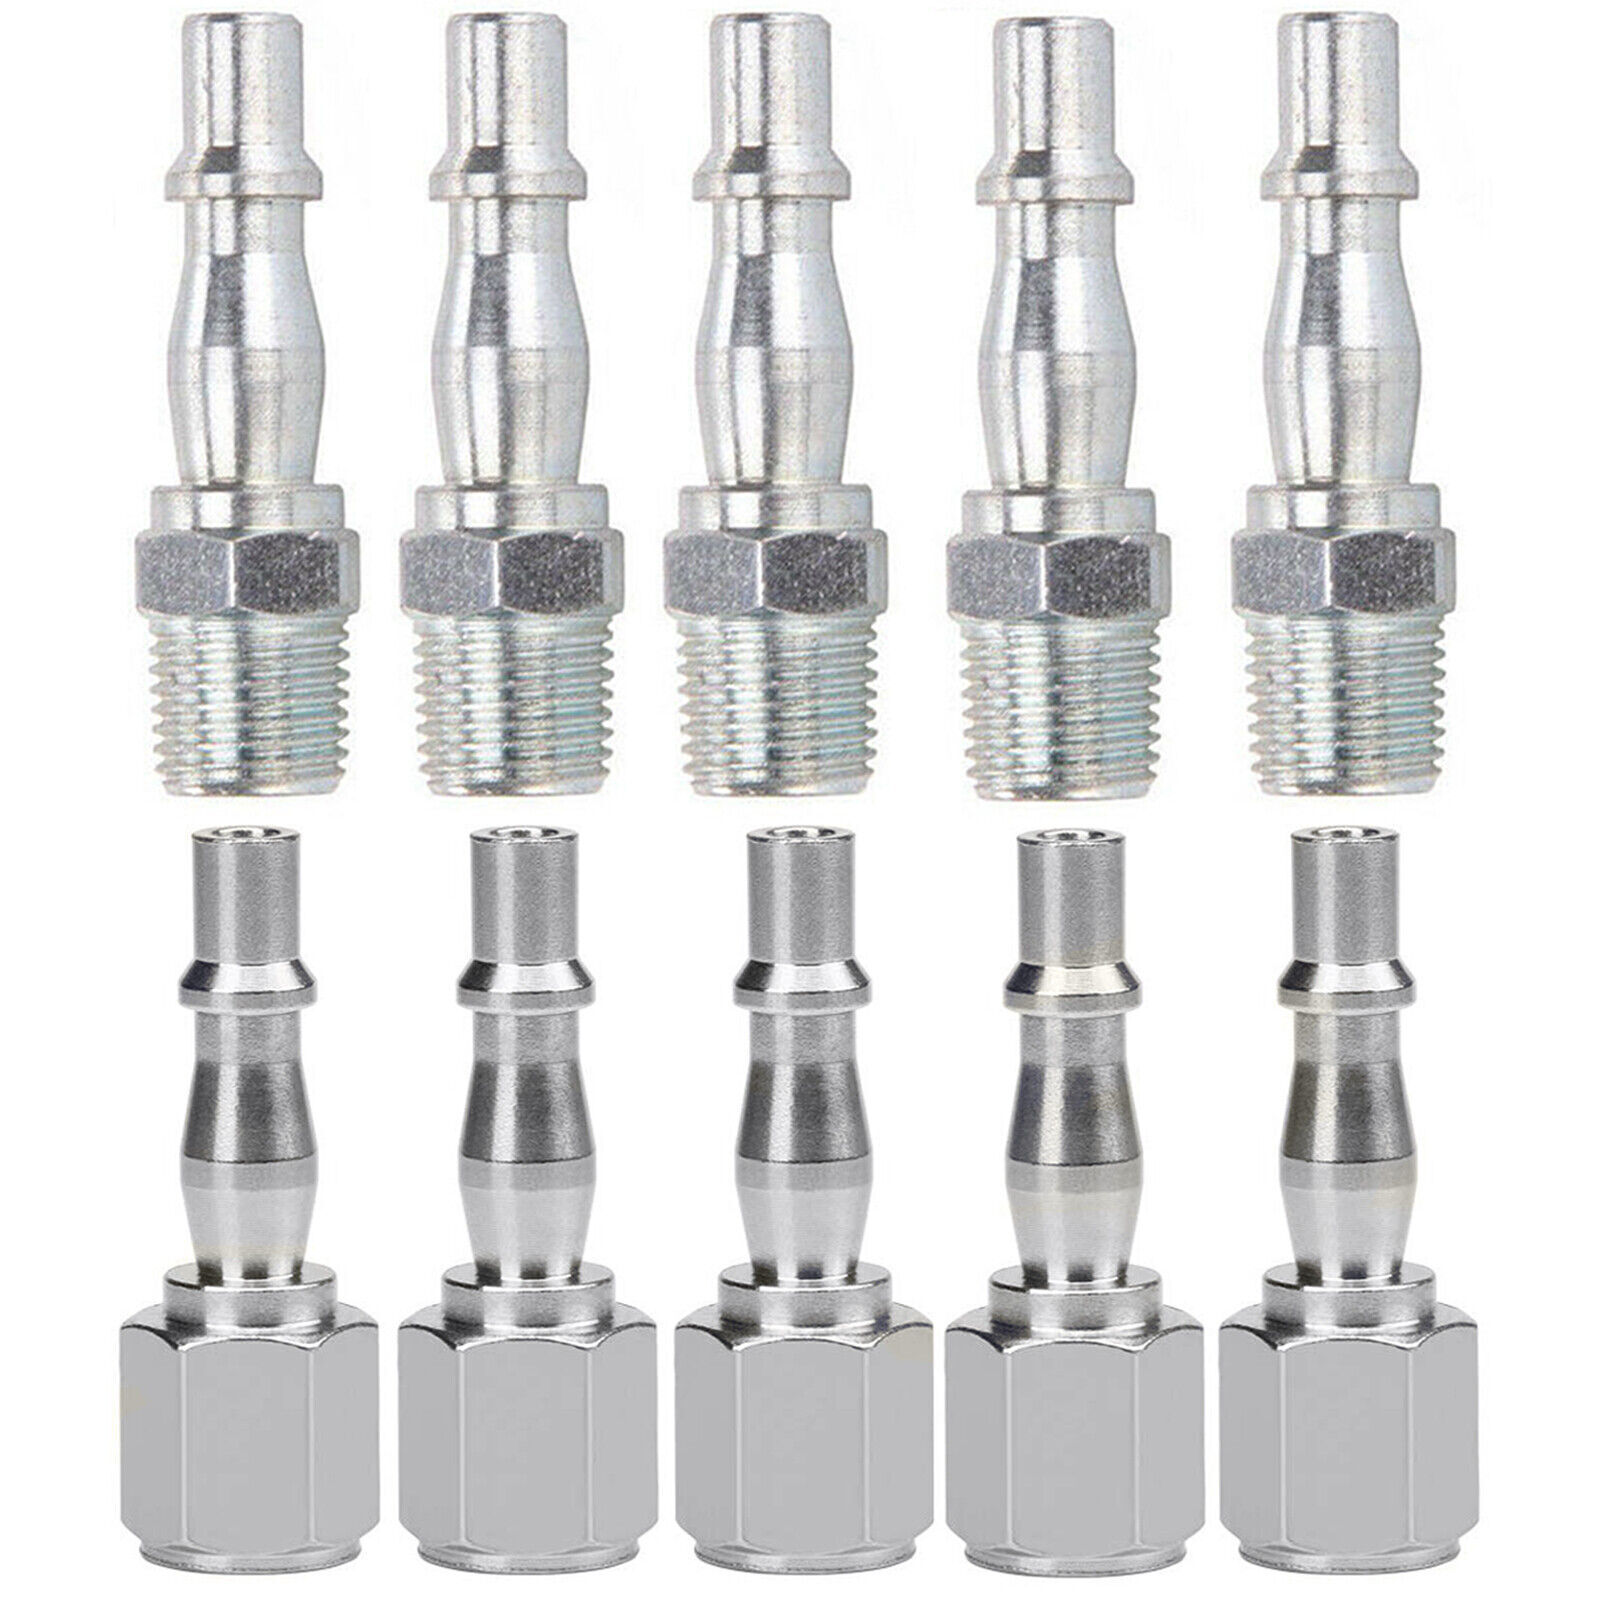 Pack of 10 Silver BSP 1/4 Quick Release Male Female Air Line Hose Compressor Fitting Connector